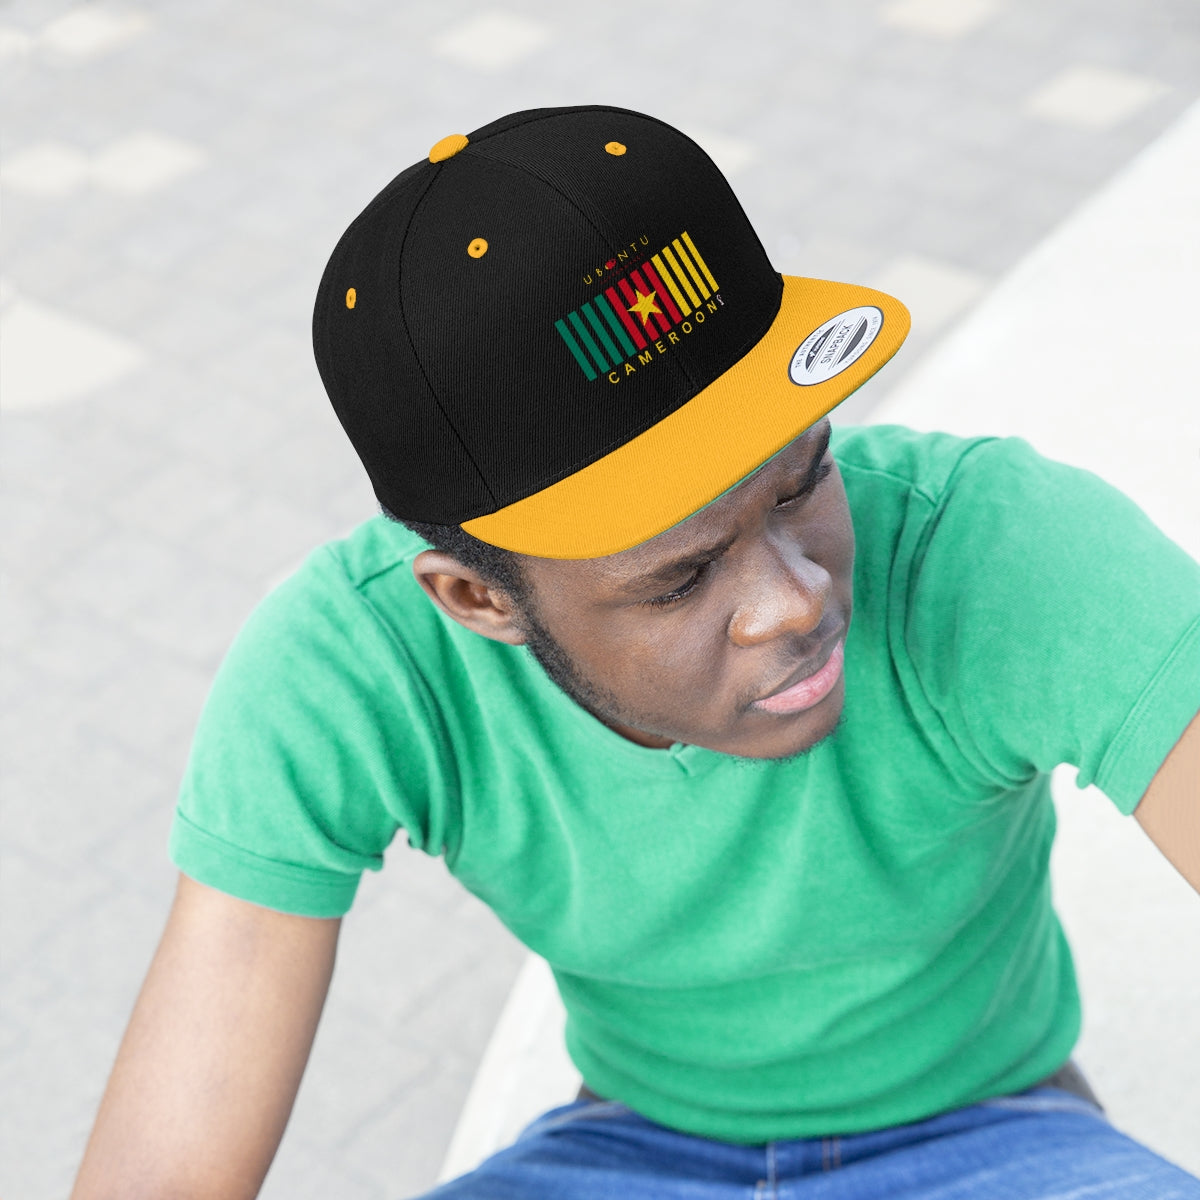 Cameroon  flag colors  unisex hat football soccer fans  world cup gift hat